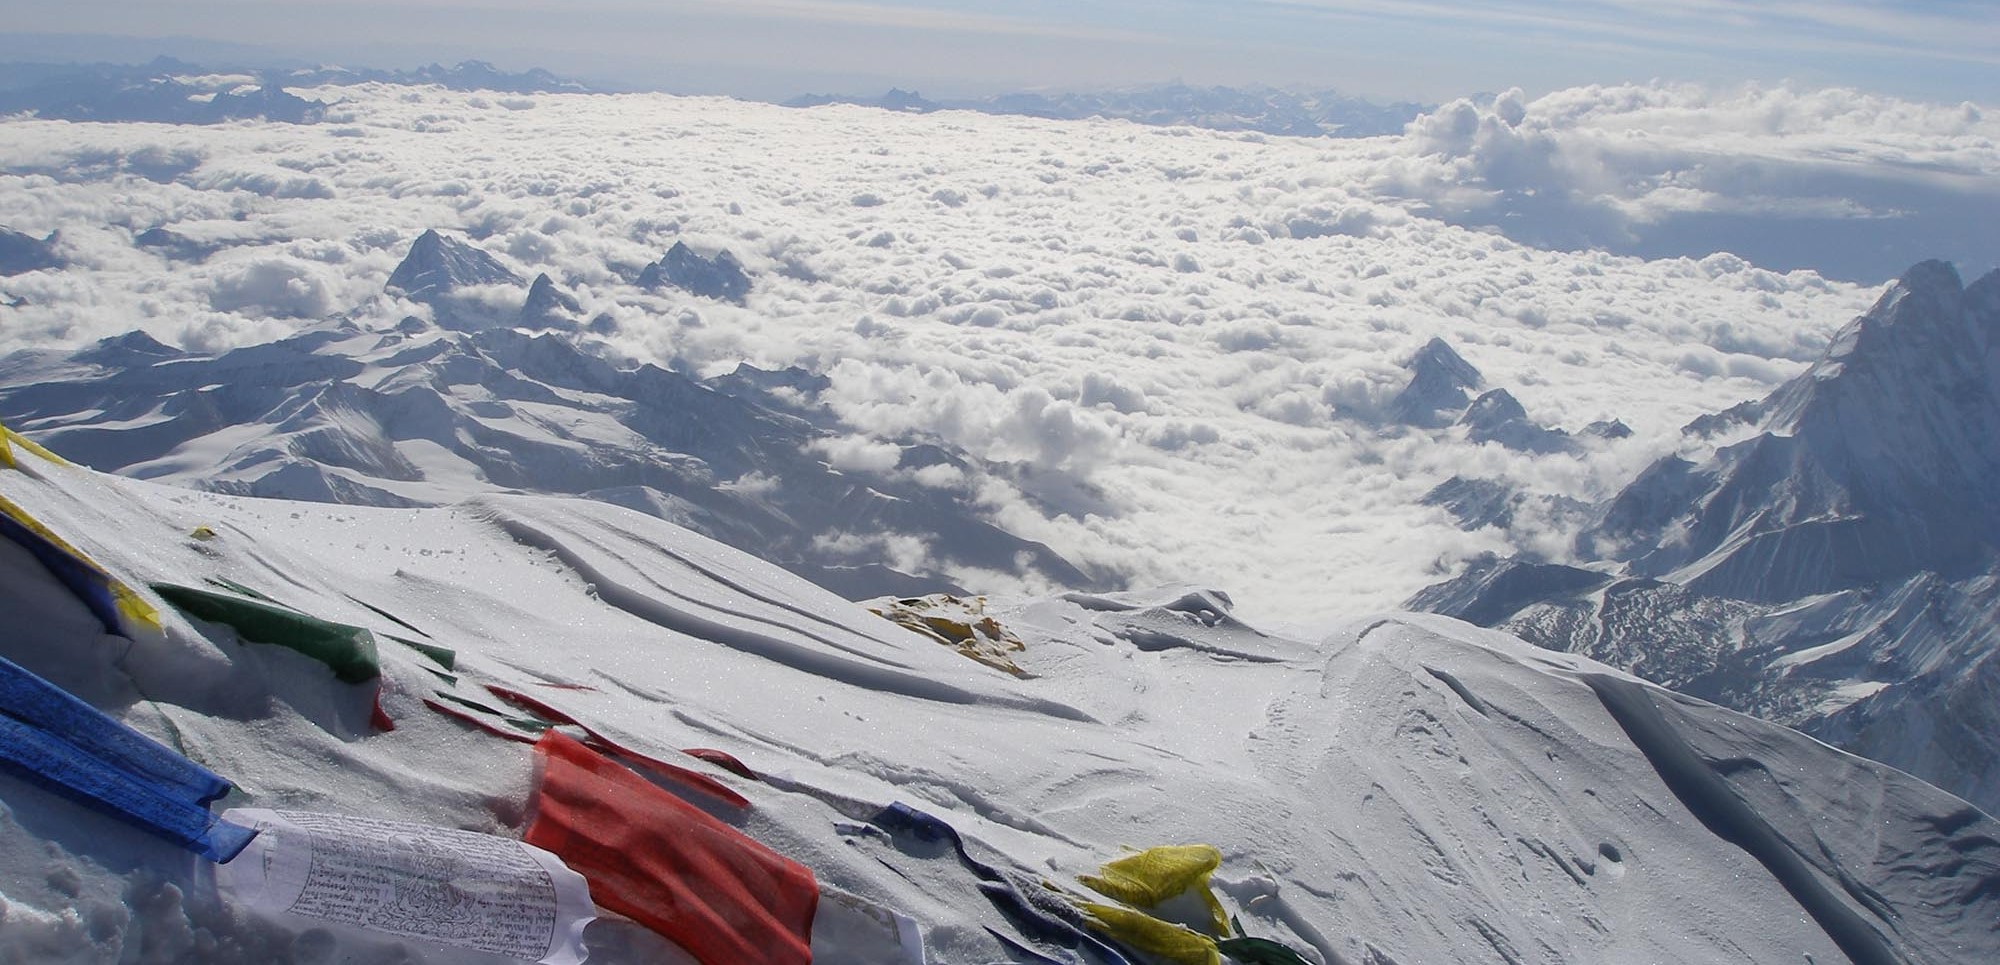 Prayer flags strewn on the summit of Mount Everest